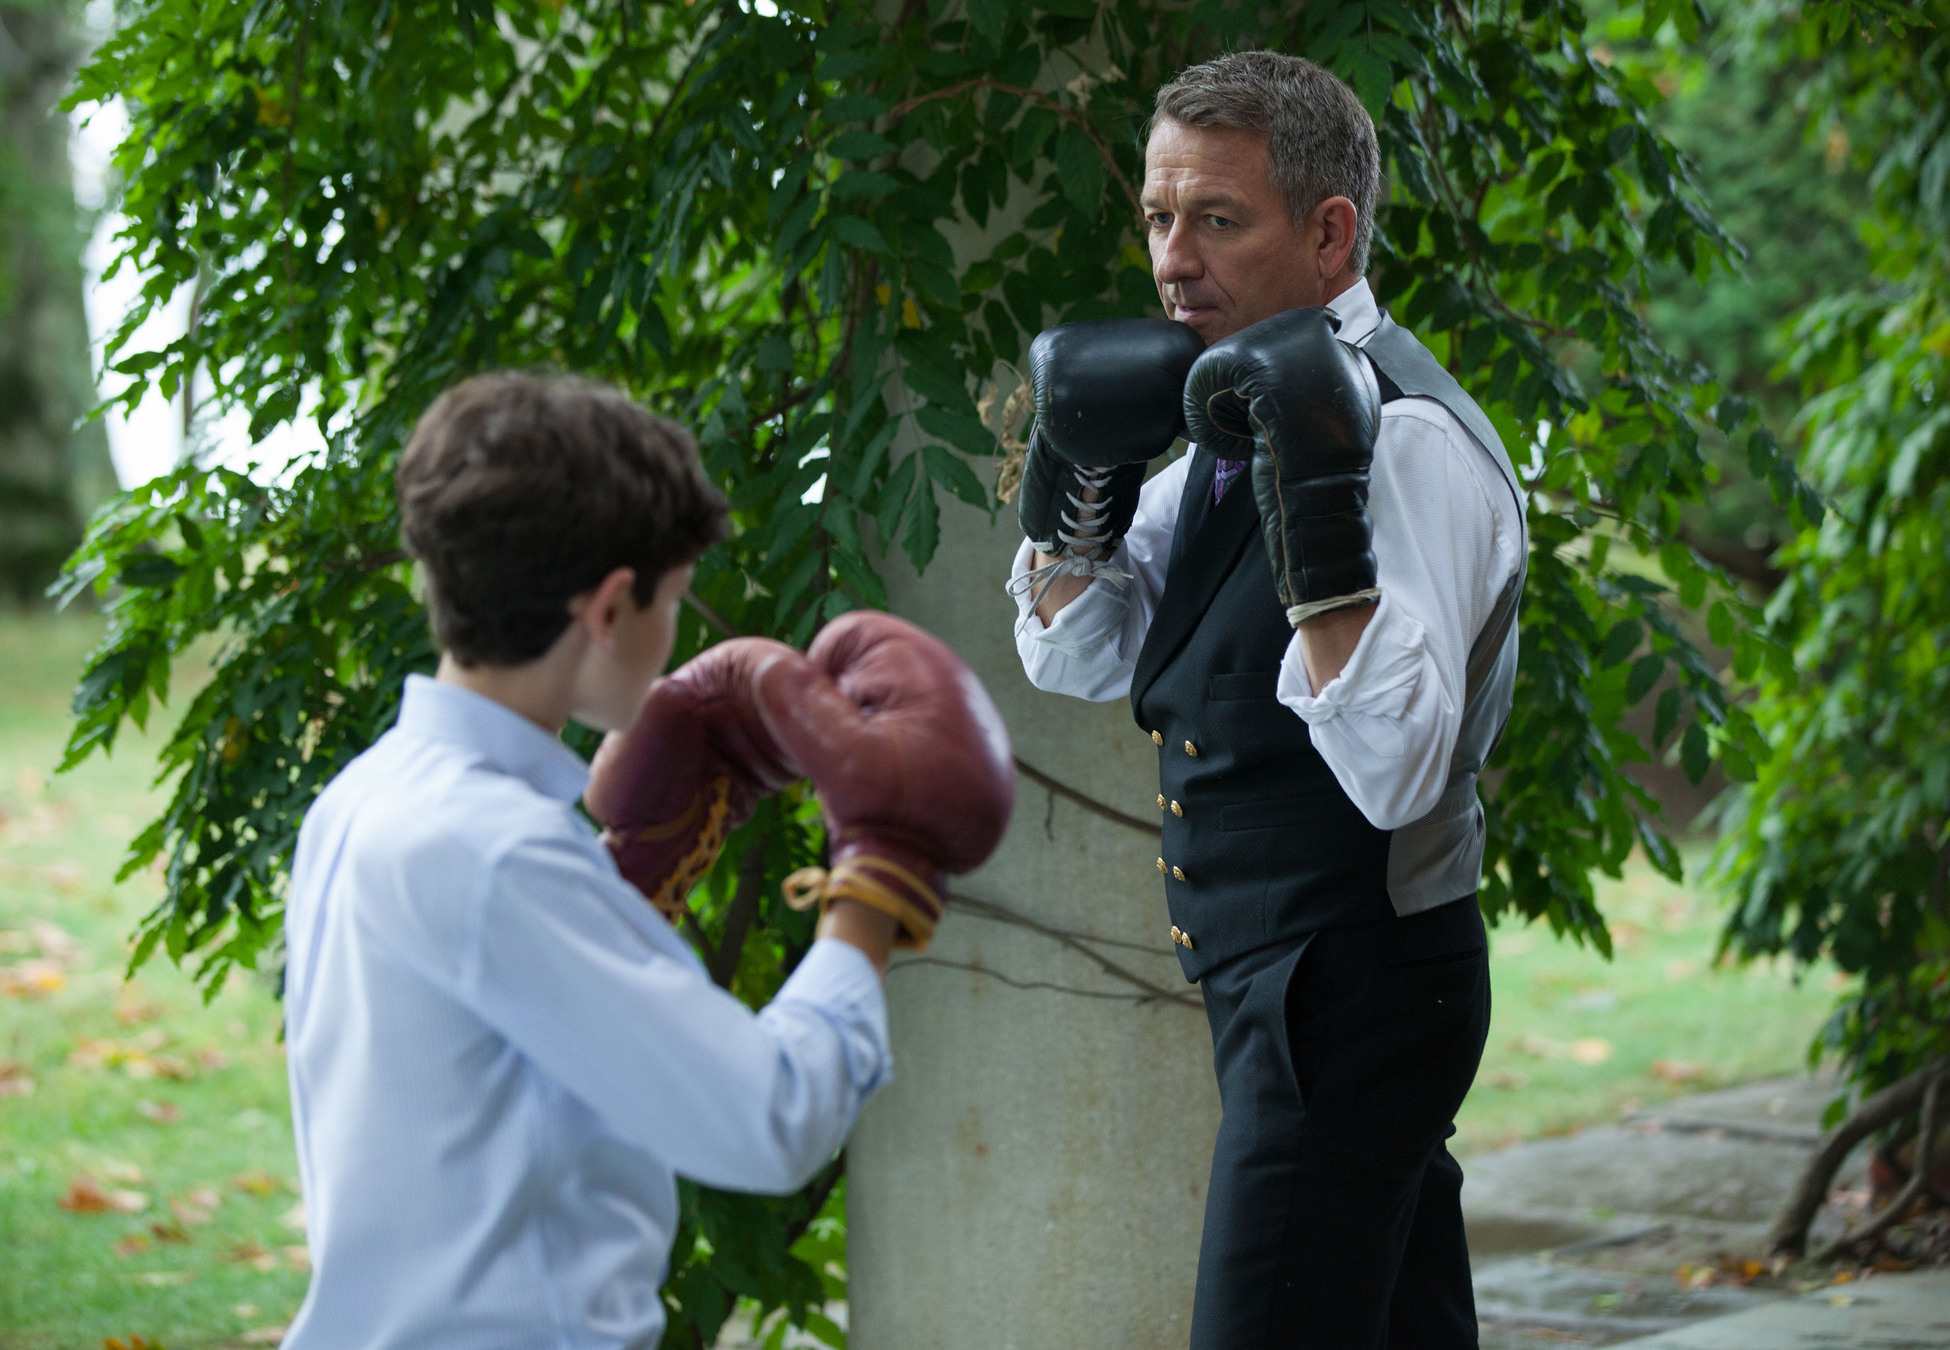 GOTHAM: Alfred (Sean Pertwee, R) gives Bruce (David Mazouz, L) a lesson on fighting in the "Harvey Dent" episode of GOTHAM airing Monday, Nov. 17 (8:00-9:00 PM ET/PT) on FOX. Â©2014 Fox Broadcasting Co. Cr: Jessica Miglio/FOX